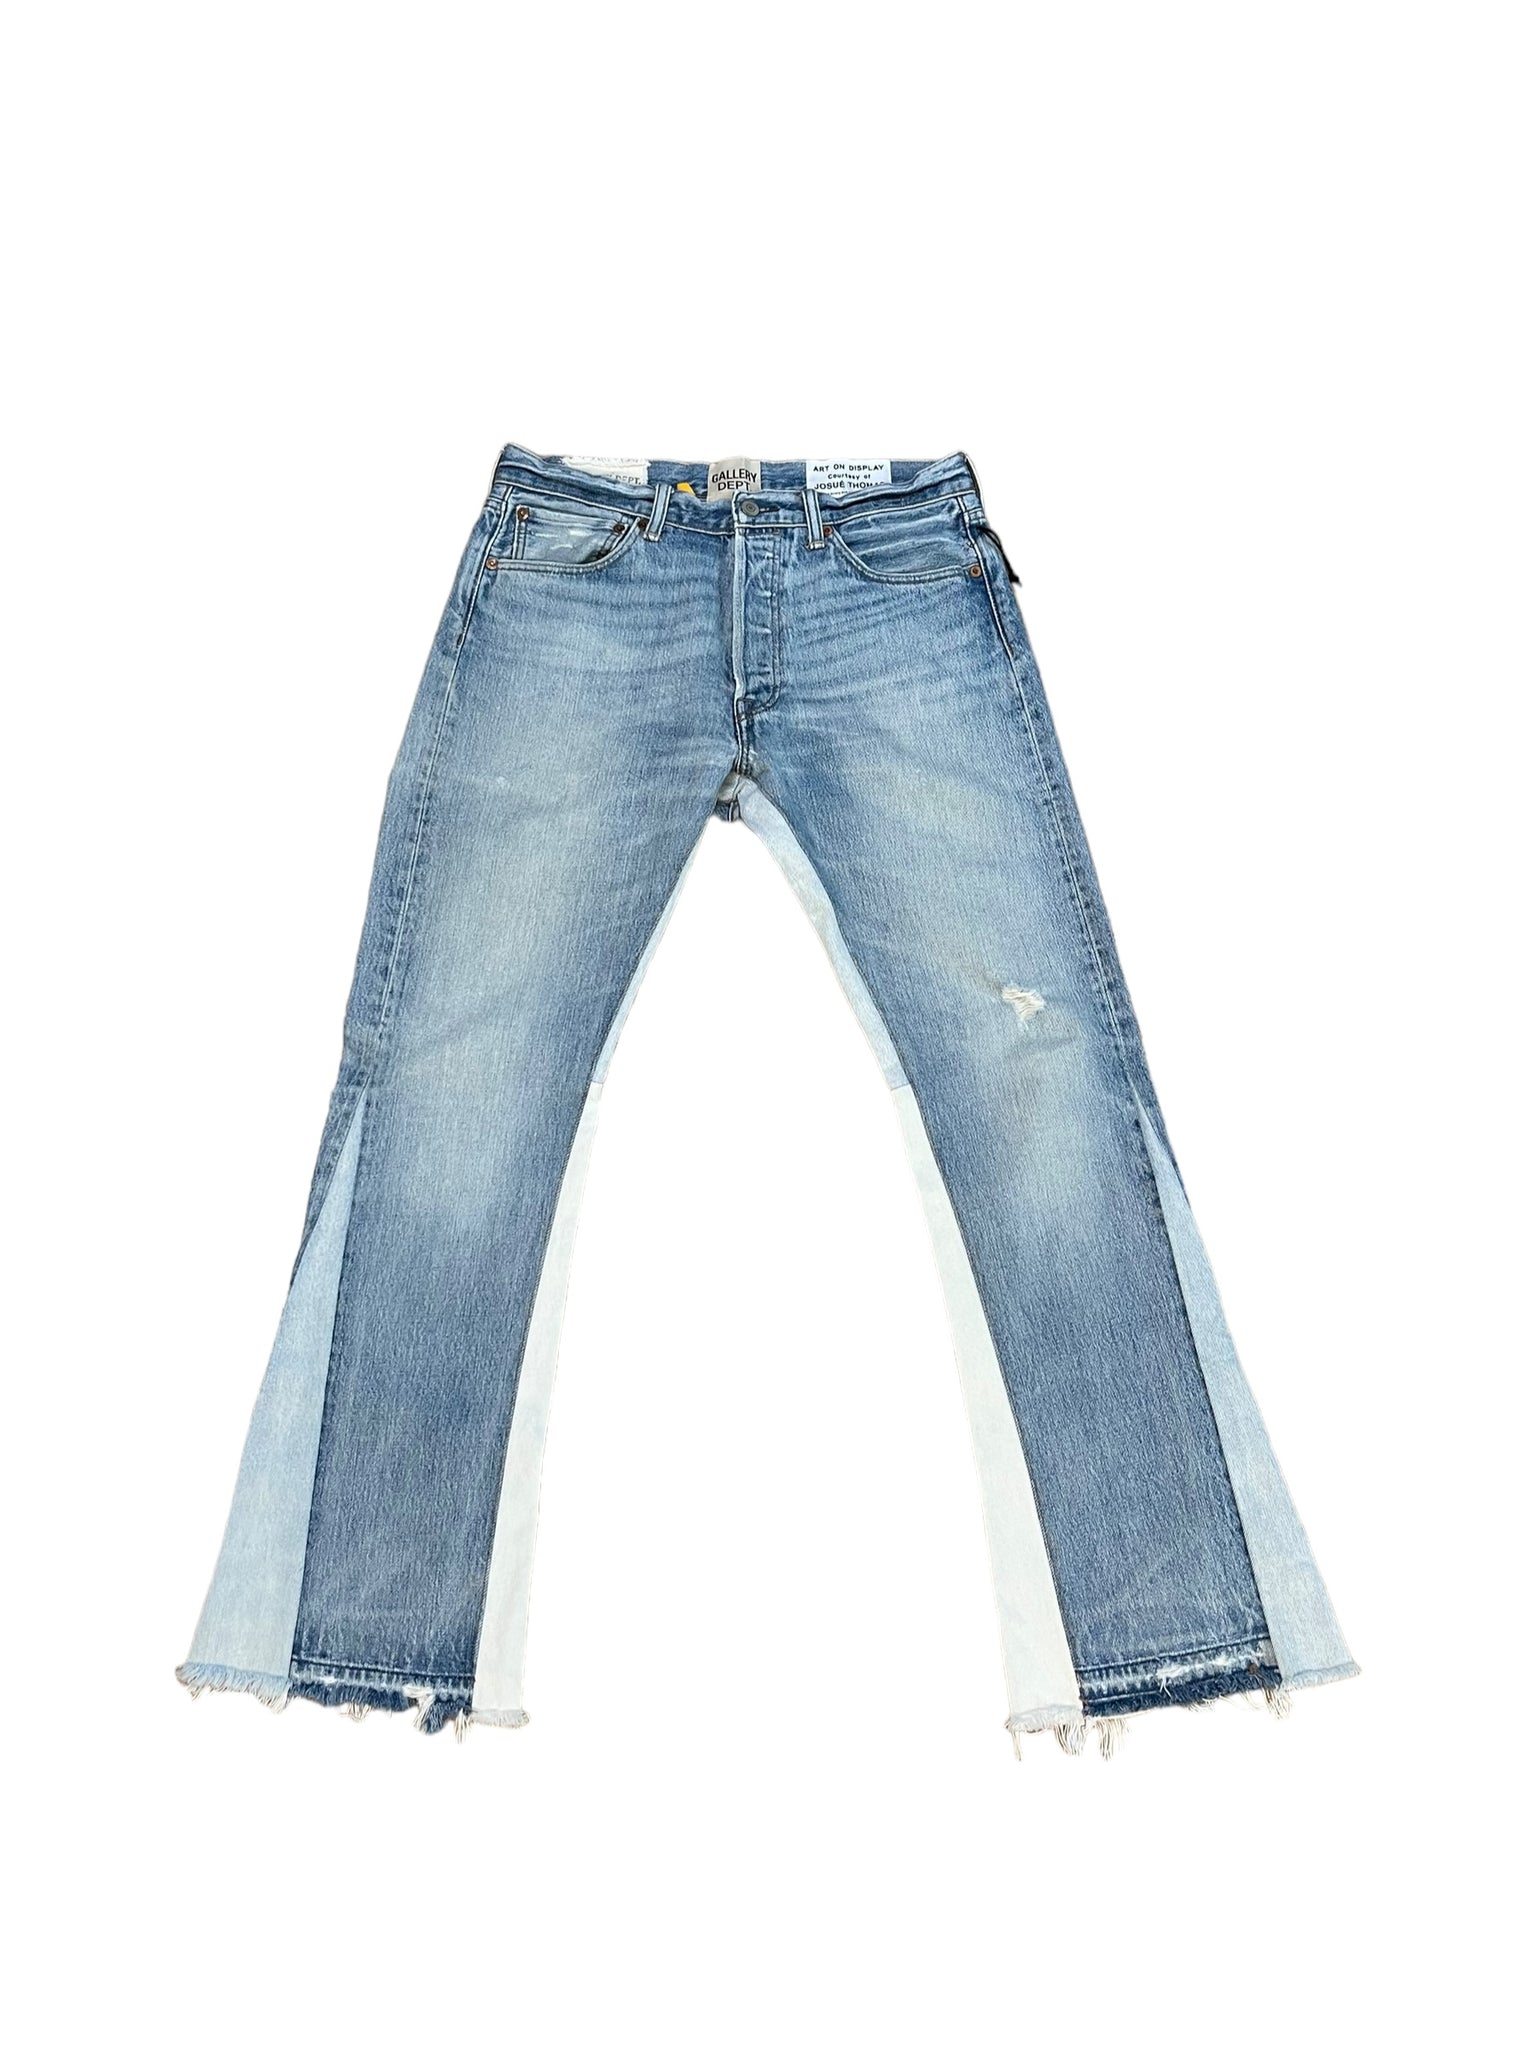 Gallery Dept. Classic Flared Jeans "Light Wash"